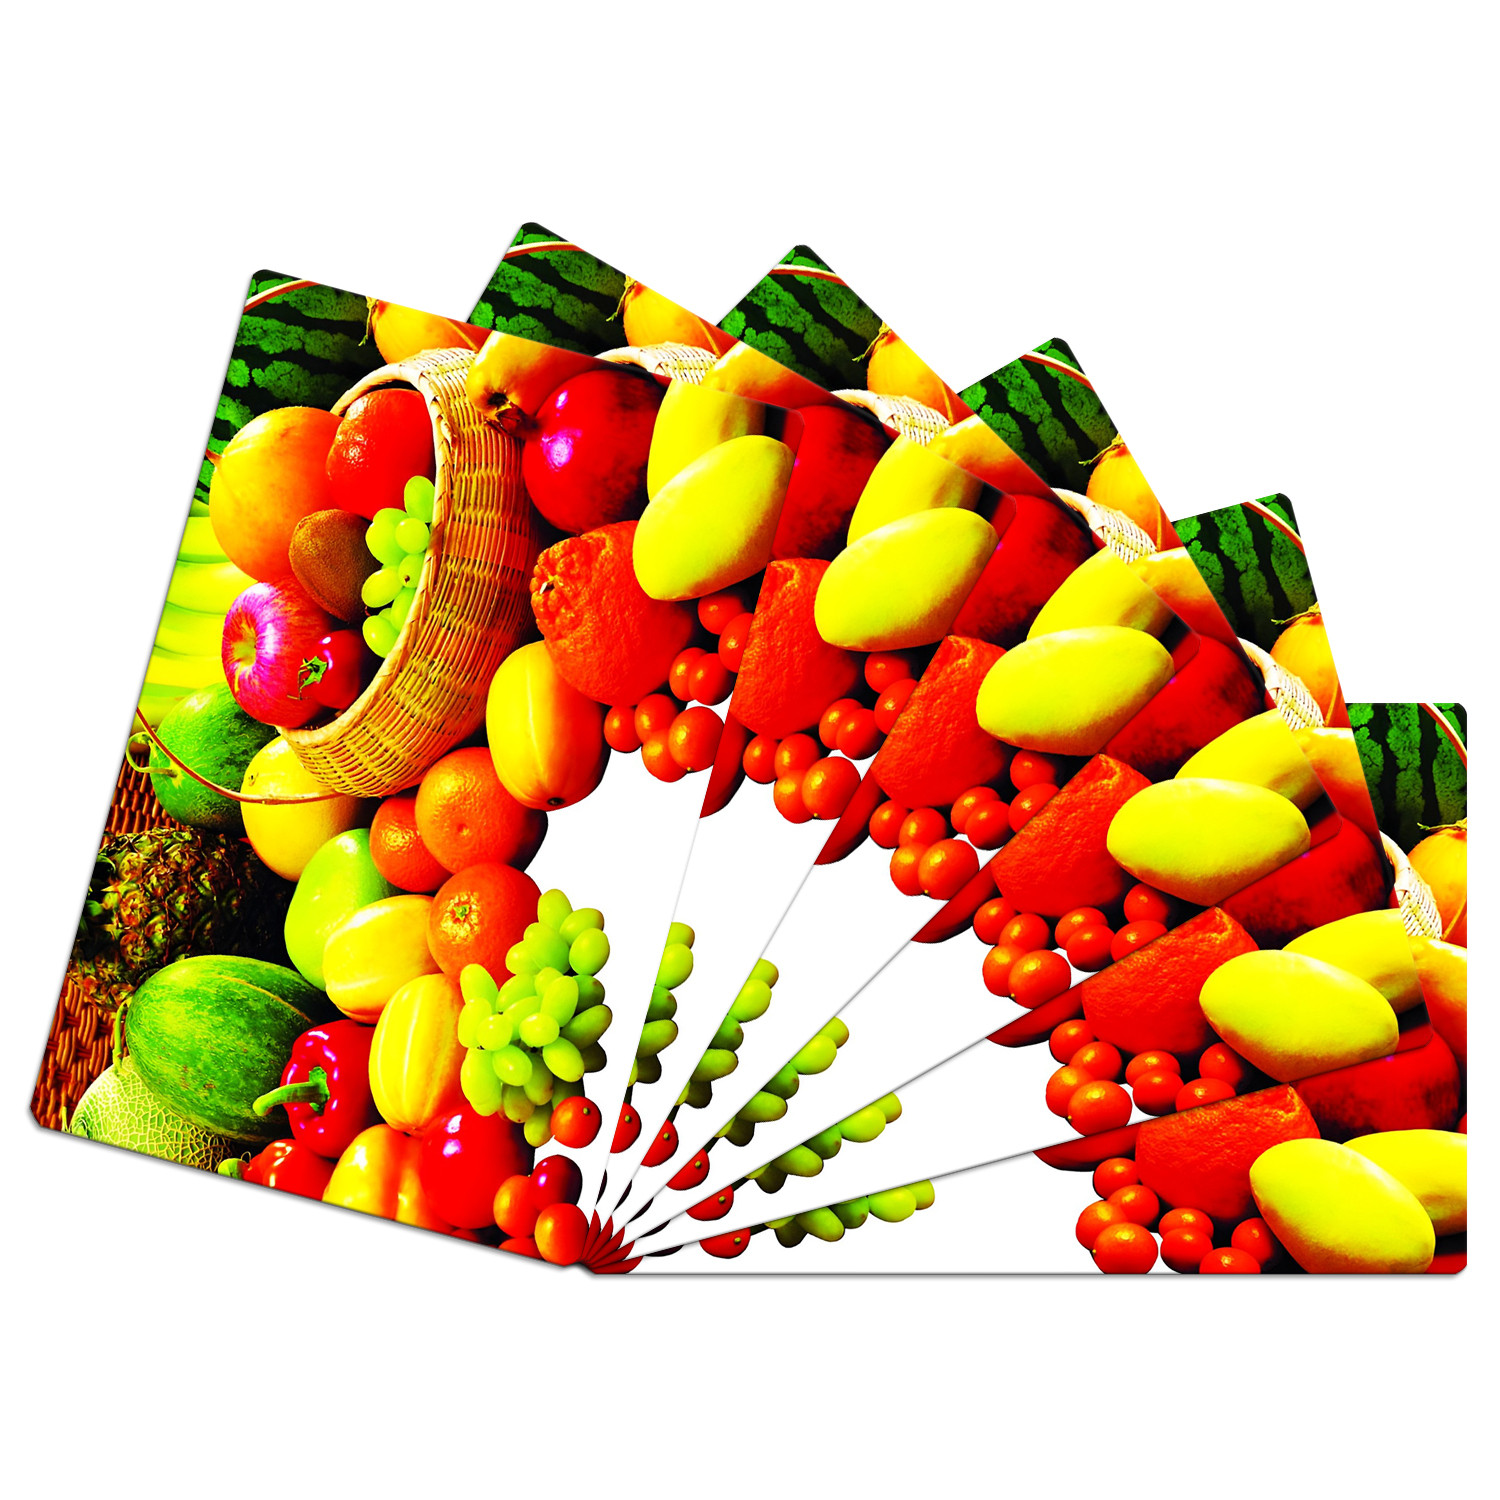 Kuber Industries Dining Table Mat | PVC Fruits Print | Table Mat | Placemats for Kitchen | Refrigerator Liners Mats | Shelf Liner Mat | Set of 6 | Multicolor